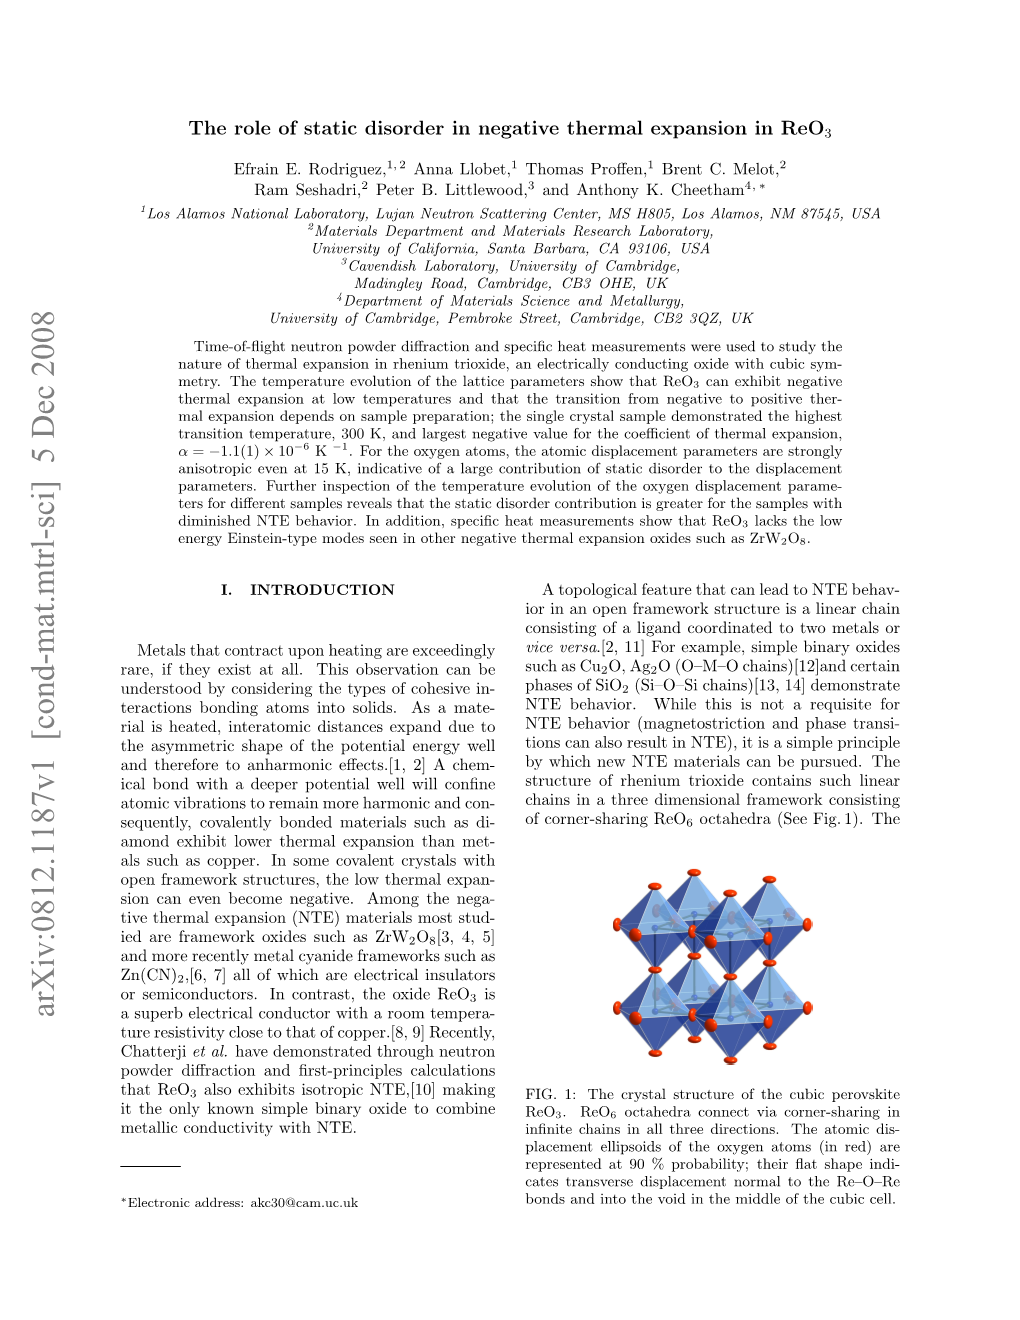 The Role of Static Disorder in Negative Thermal Expansion in Reo3